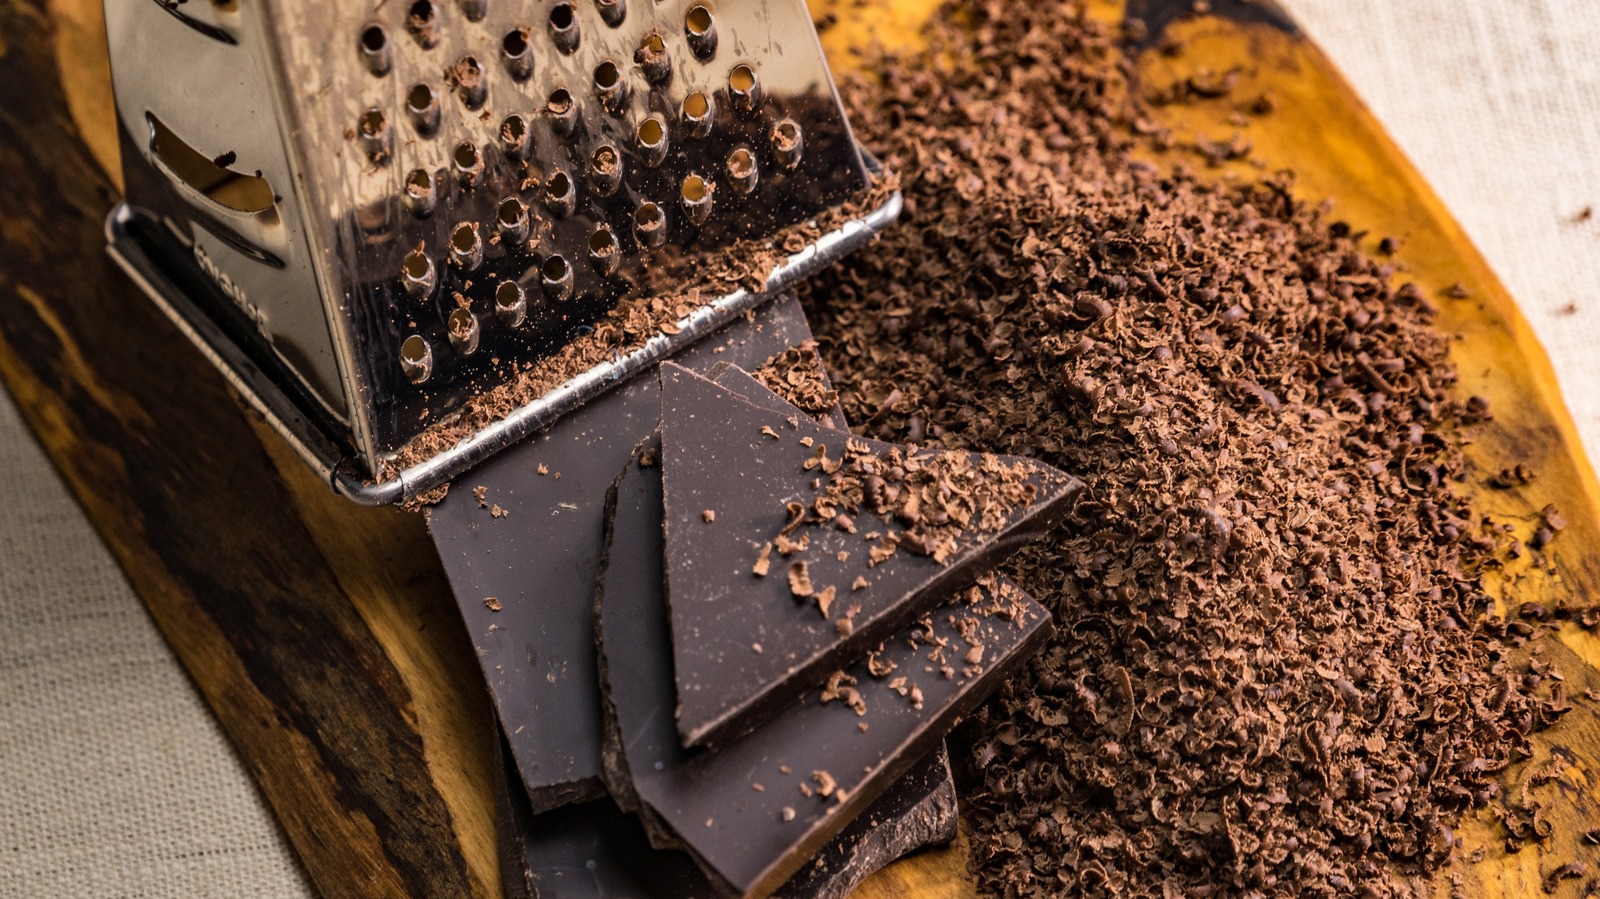 https://www.tastingtable.com/img/gallery/the-clever-hack-to-grate-chocolate-without-creating-a-mess/l-intro-1695682015.jpg